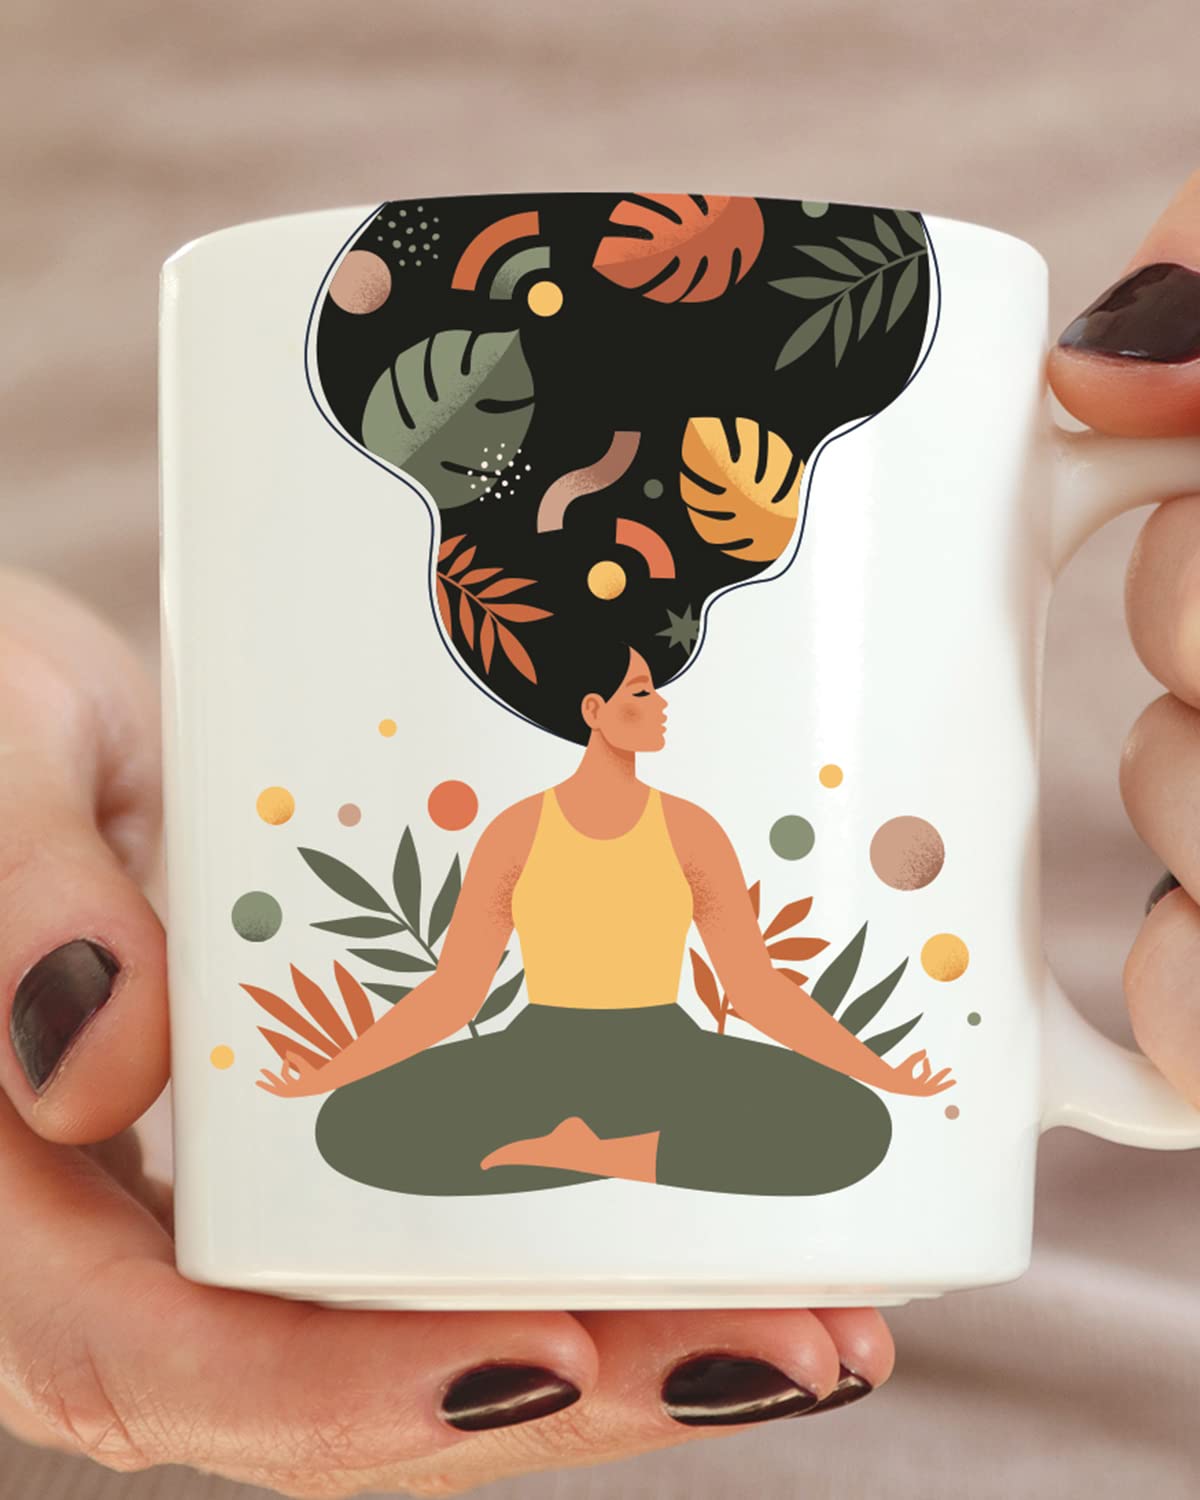 Girl in Zen Mode Coffee Mug - Birthday Gift, Motivational Mug, Printed with Inspiring Quotes, Positivity Mug, Inspirational Gift for Her, Best Friend Gift, Gifts for Her, Cheer Up Gift